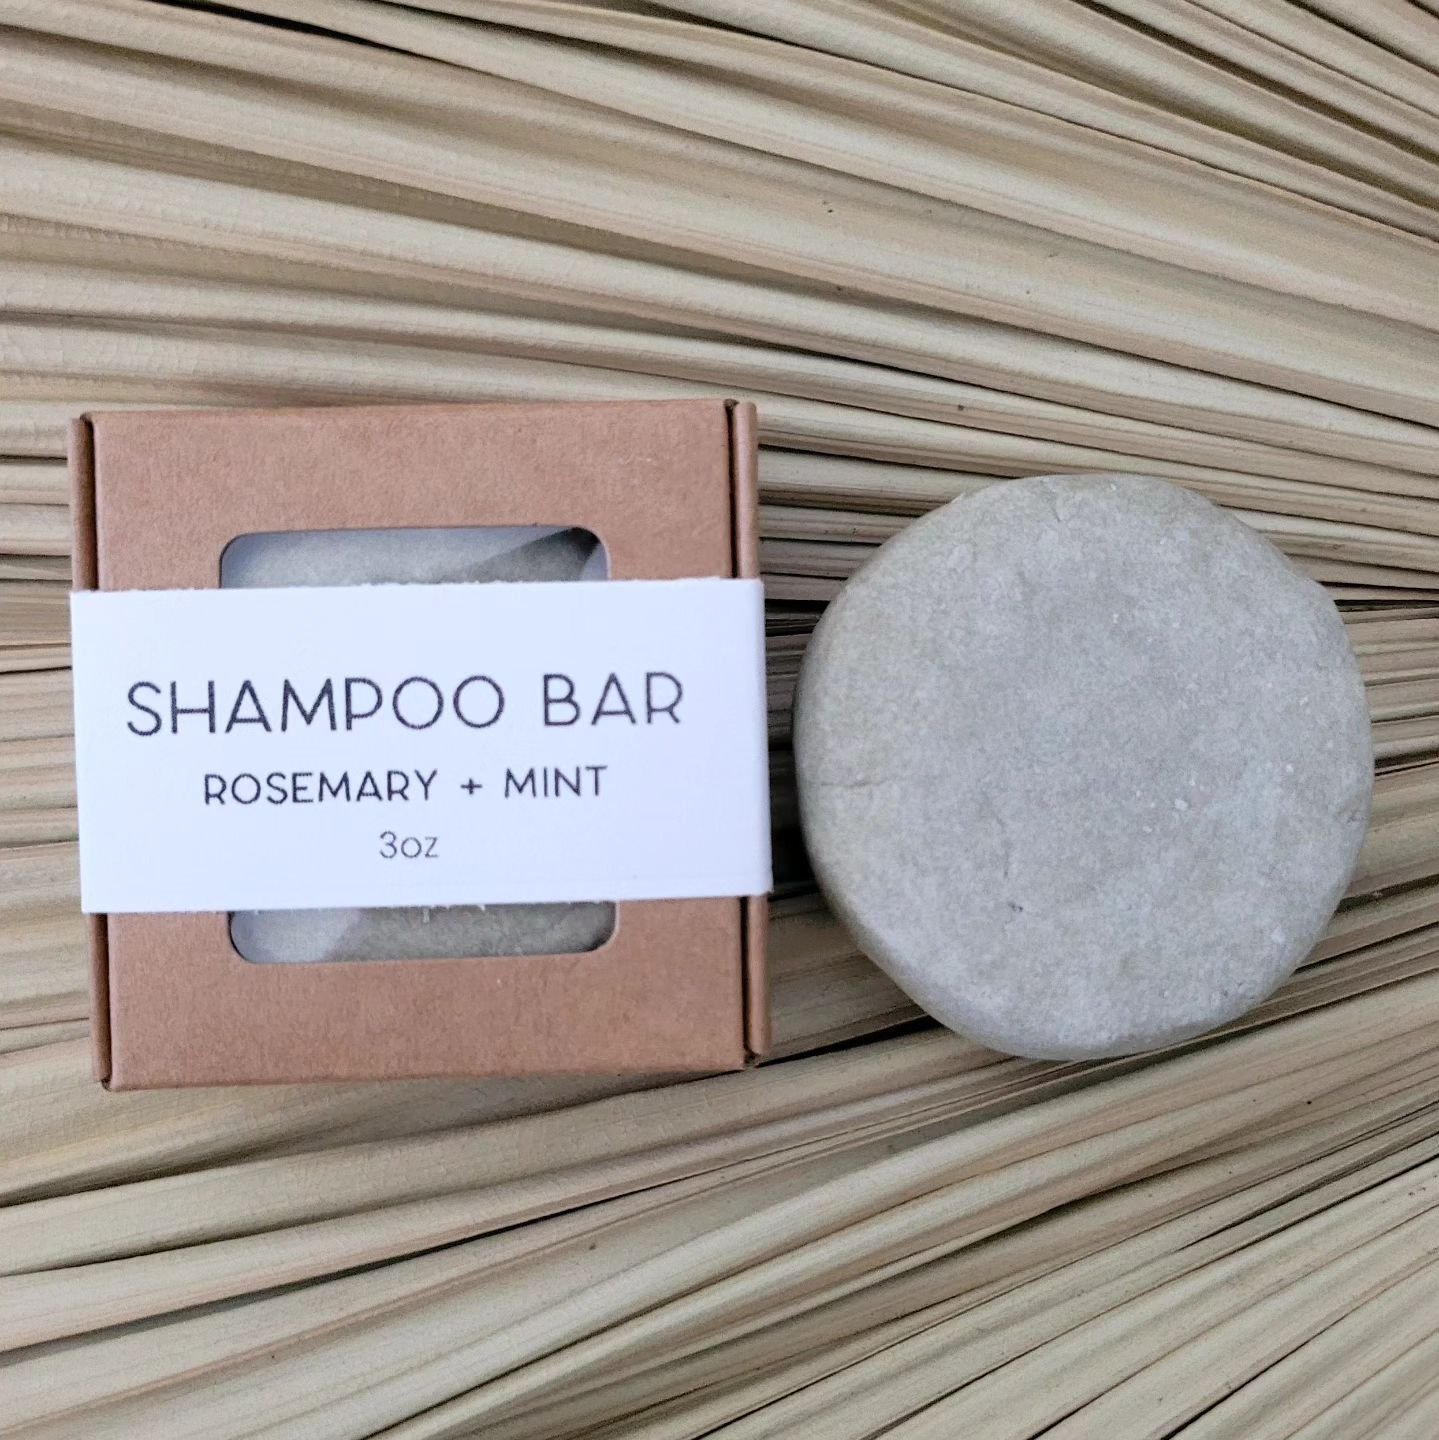 Introducing our new Rosemary + Mint Shampoo Bar...

Infused with the aromatic essence of rosemary and the cooling touch of mint. This shampoo bar not only cleanses your hair but also stimulates your scalp, promoting healthy hair growth. The herbal fr